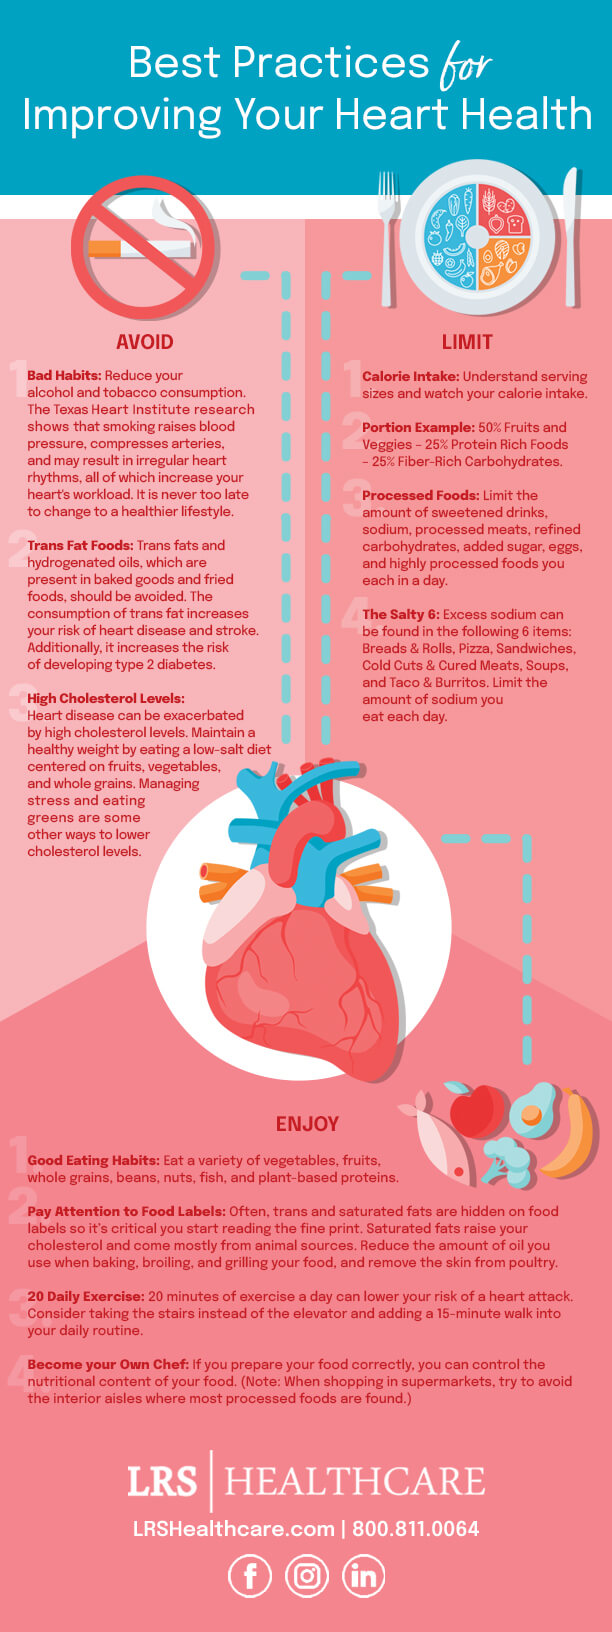 A list of best practices for improving heart health